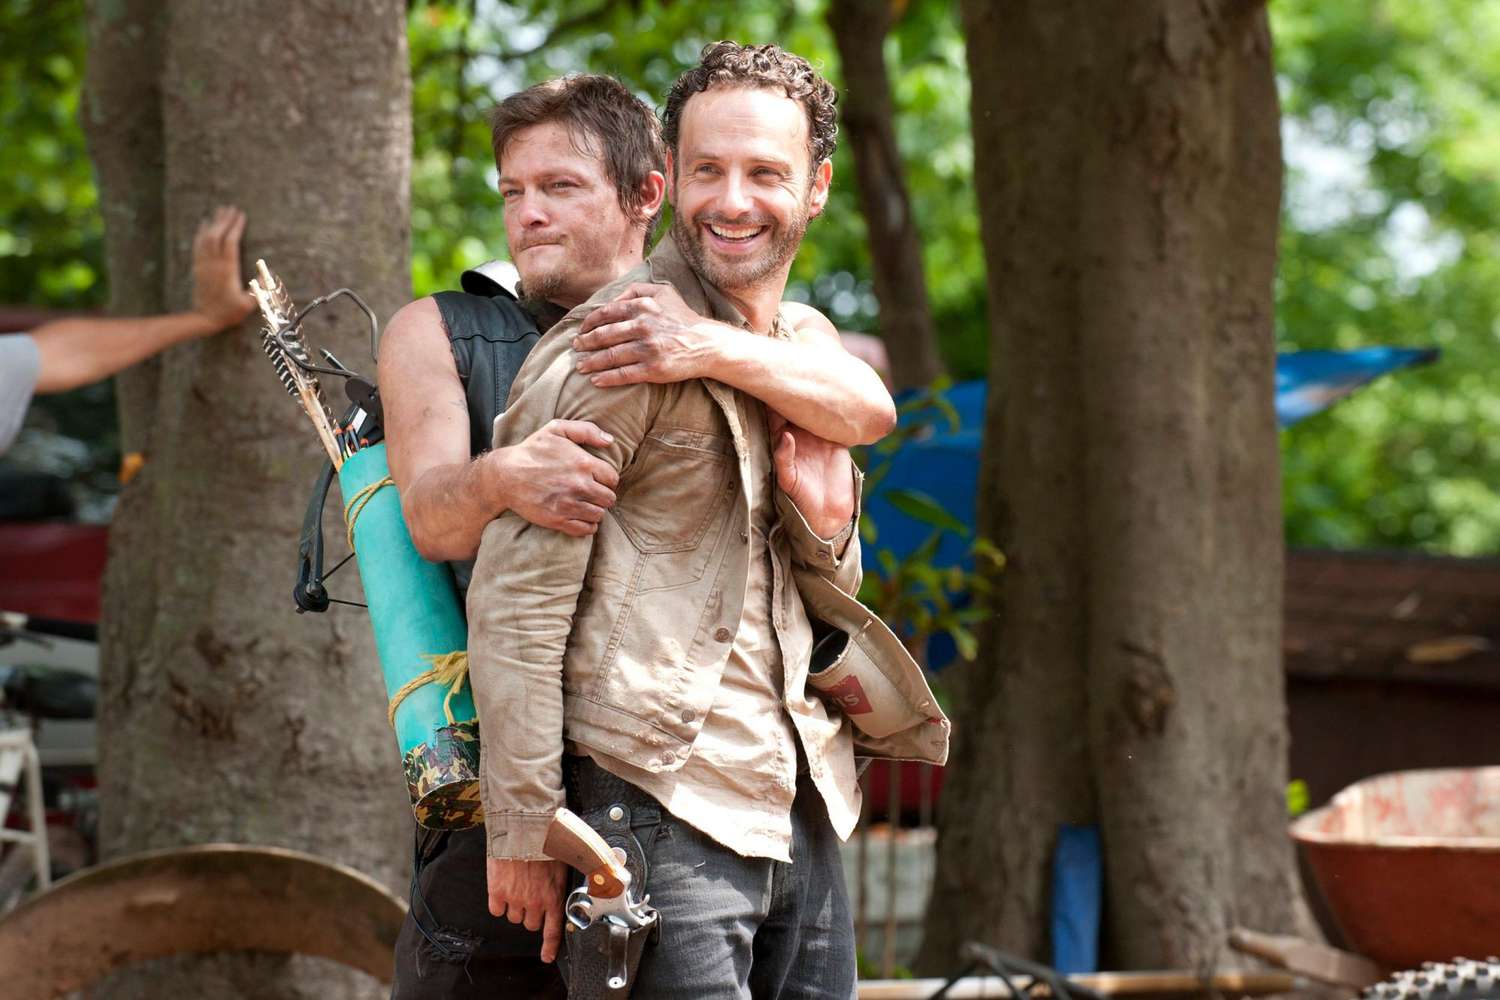 Norman Reedus on Andrew Lincoln